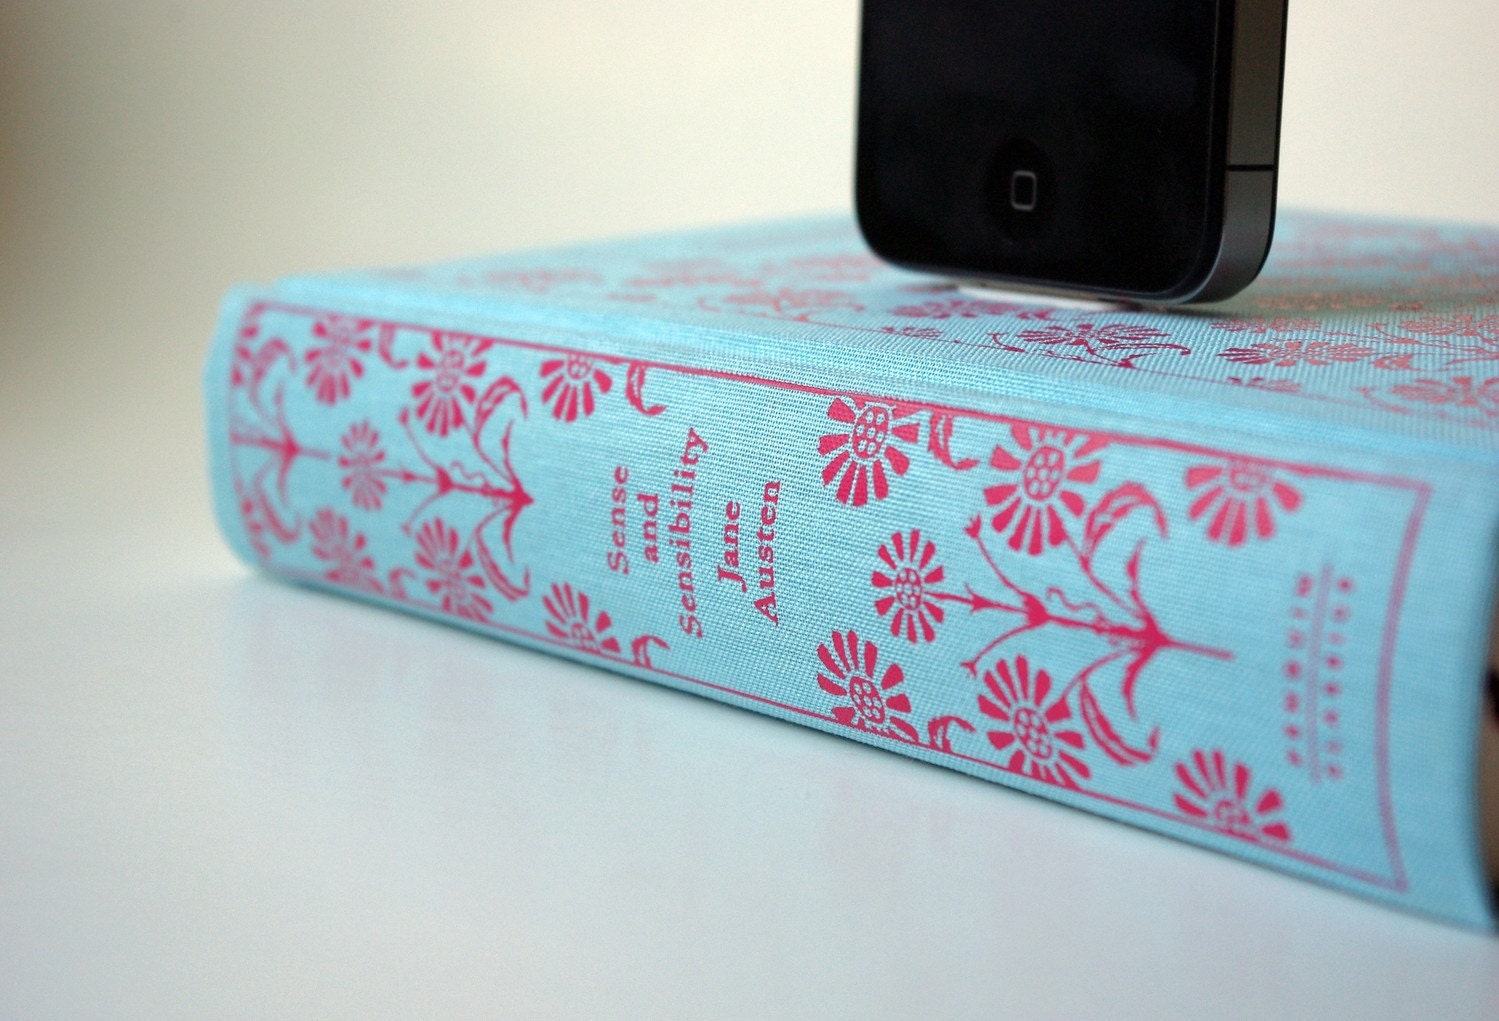 Jane Austen's Sense and Sensibility Book Charging Dock for iPhone and iPod --Christmas Delivery SOLD OUT For All Docks